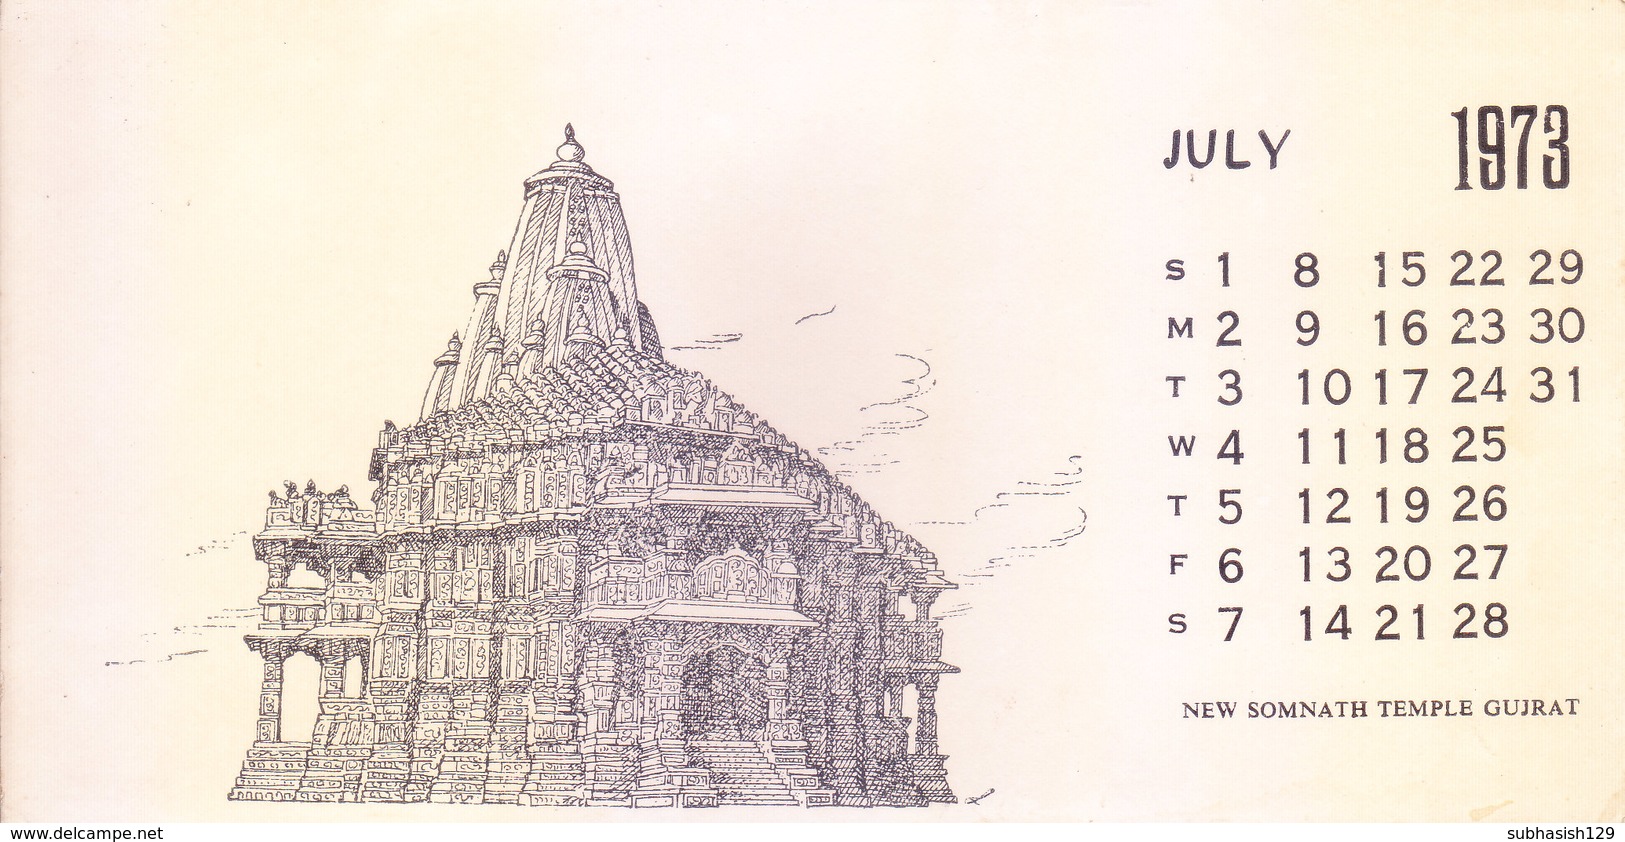 INDIA - RARE AND OLD PAPER CALENDAR - JULY 1973 -  PRINTED HAND SKETCH - NEW SOMENATH TEMPLE, GUJRAT - ANTIQUE ITEM - Big : 1971-80